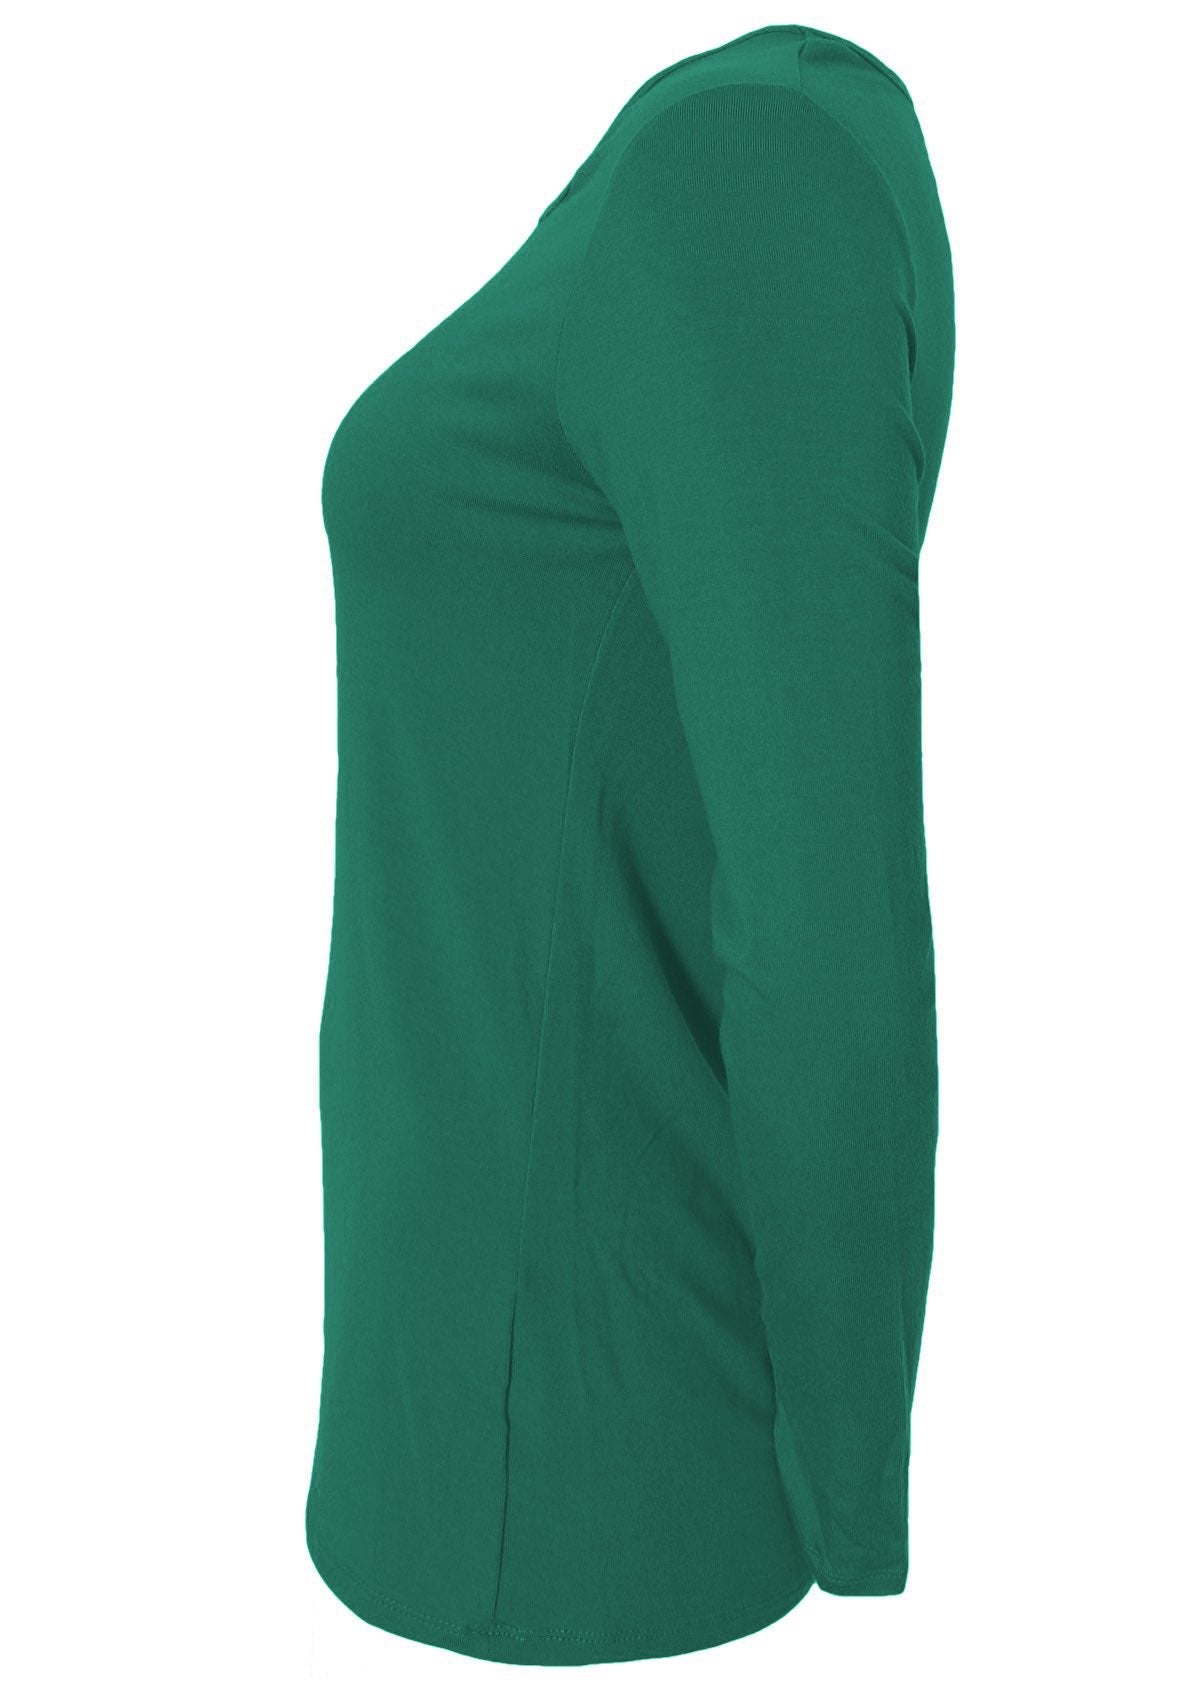 Side view of women's round neck green long sleeve rayon top.